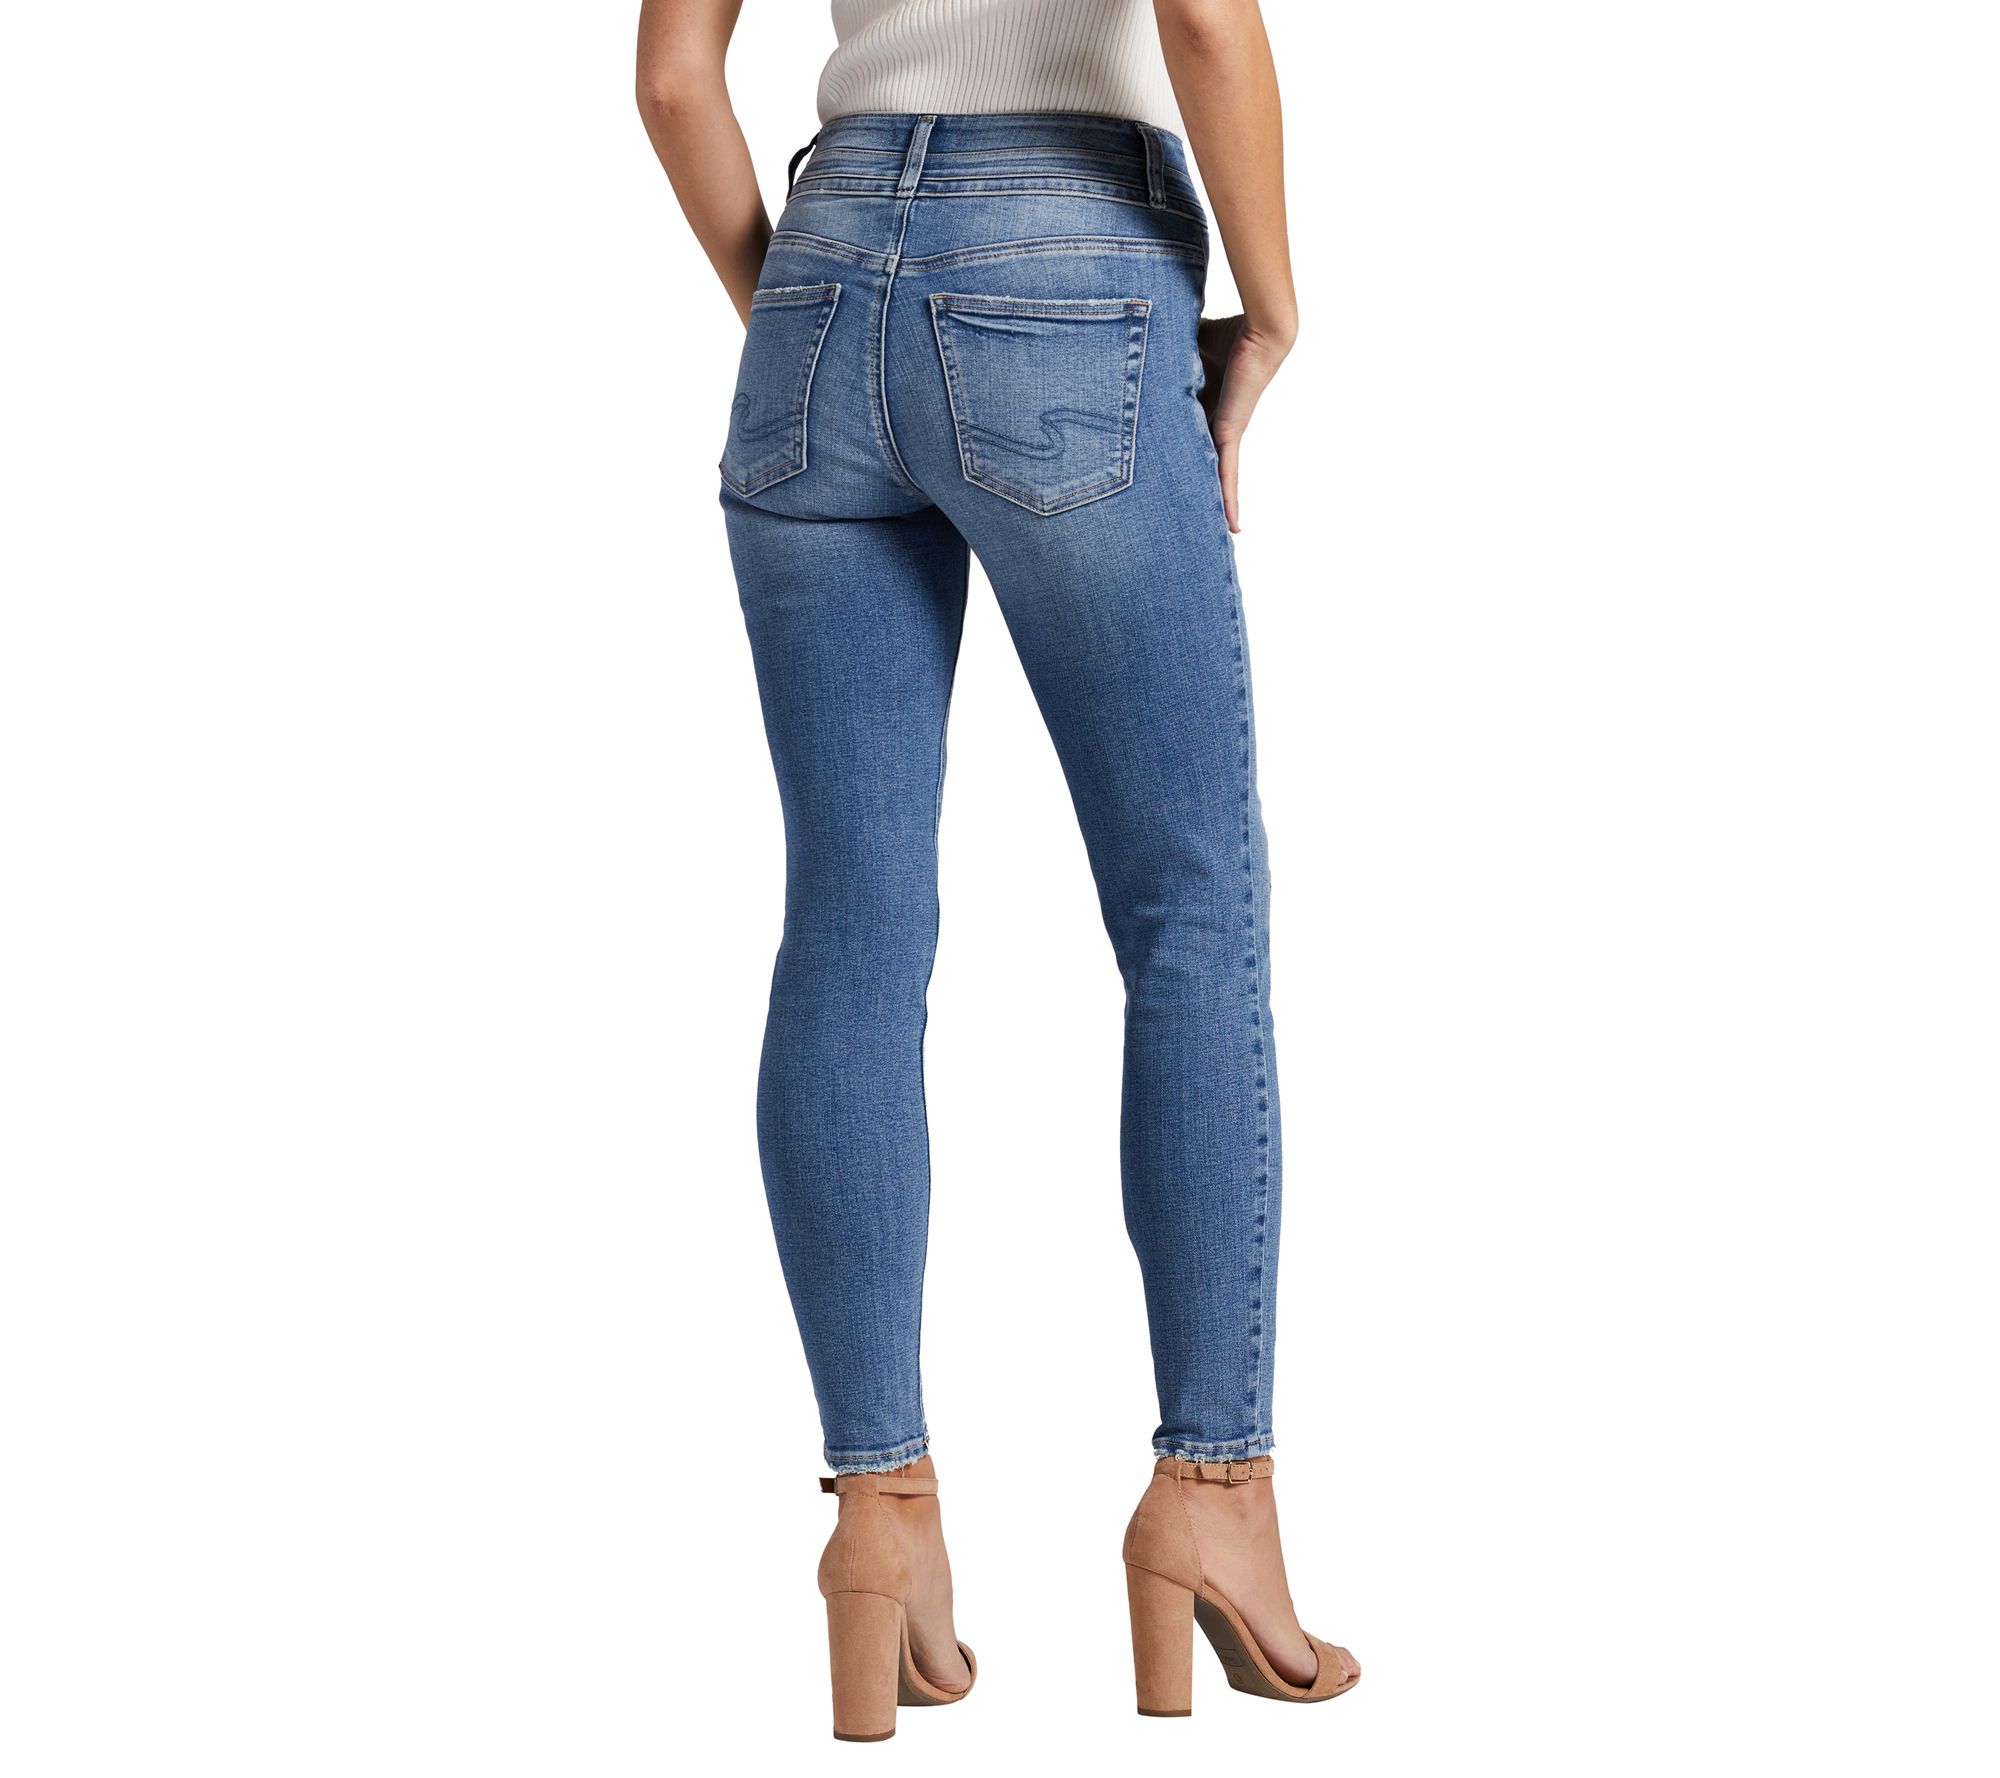 Silver Jeans Co. Avery High Rise Skinny Jeans-ECF282 - QVC.com